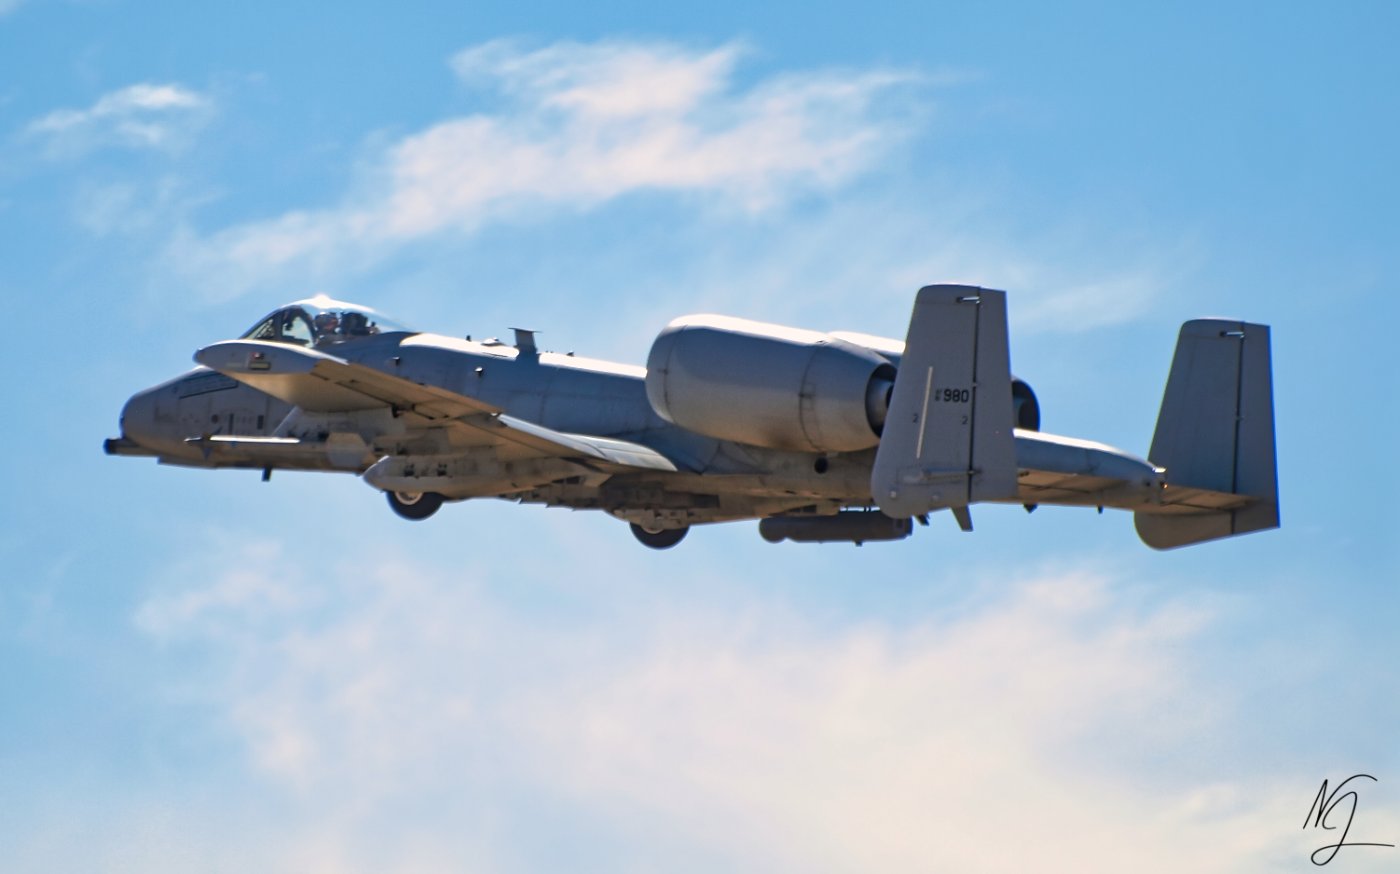 D-M A-10C Thunderbolt II 81-0980 SANDY 02 (Climb Out of Simulated Attack Run)